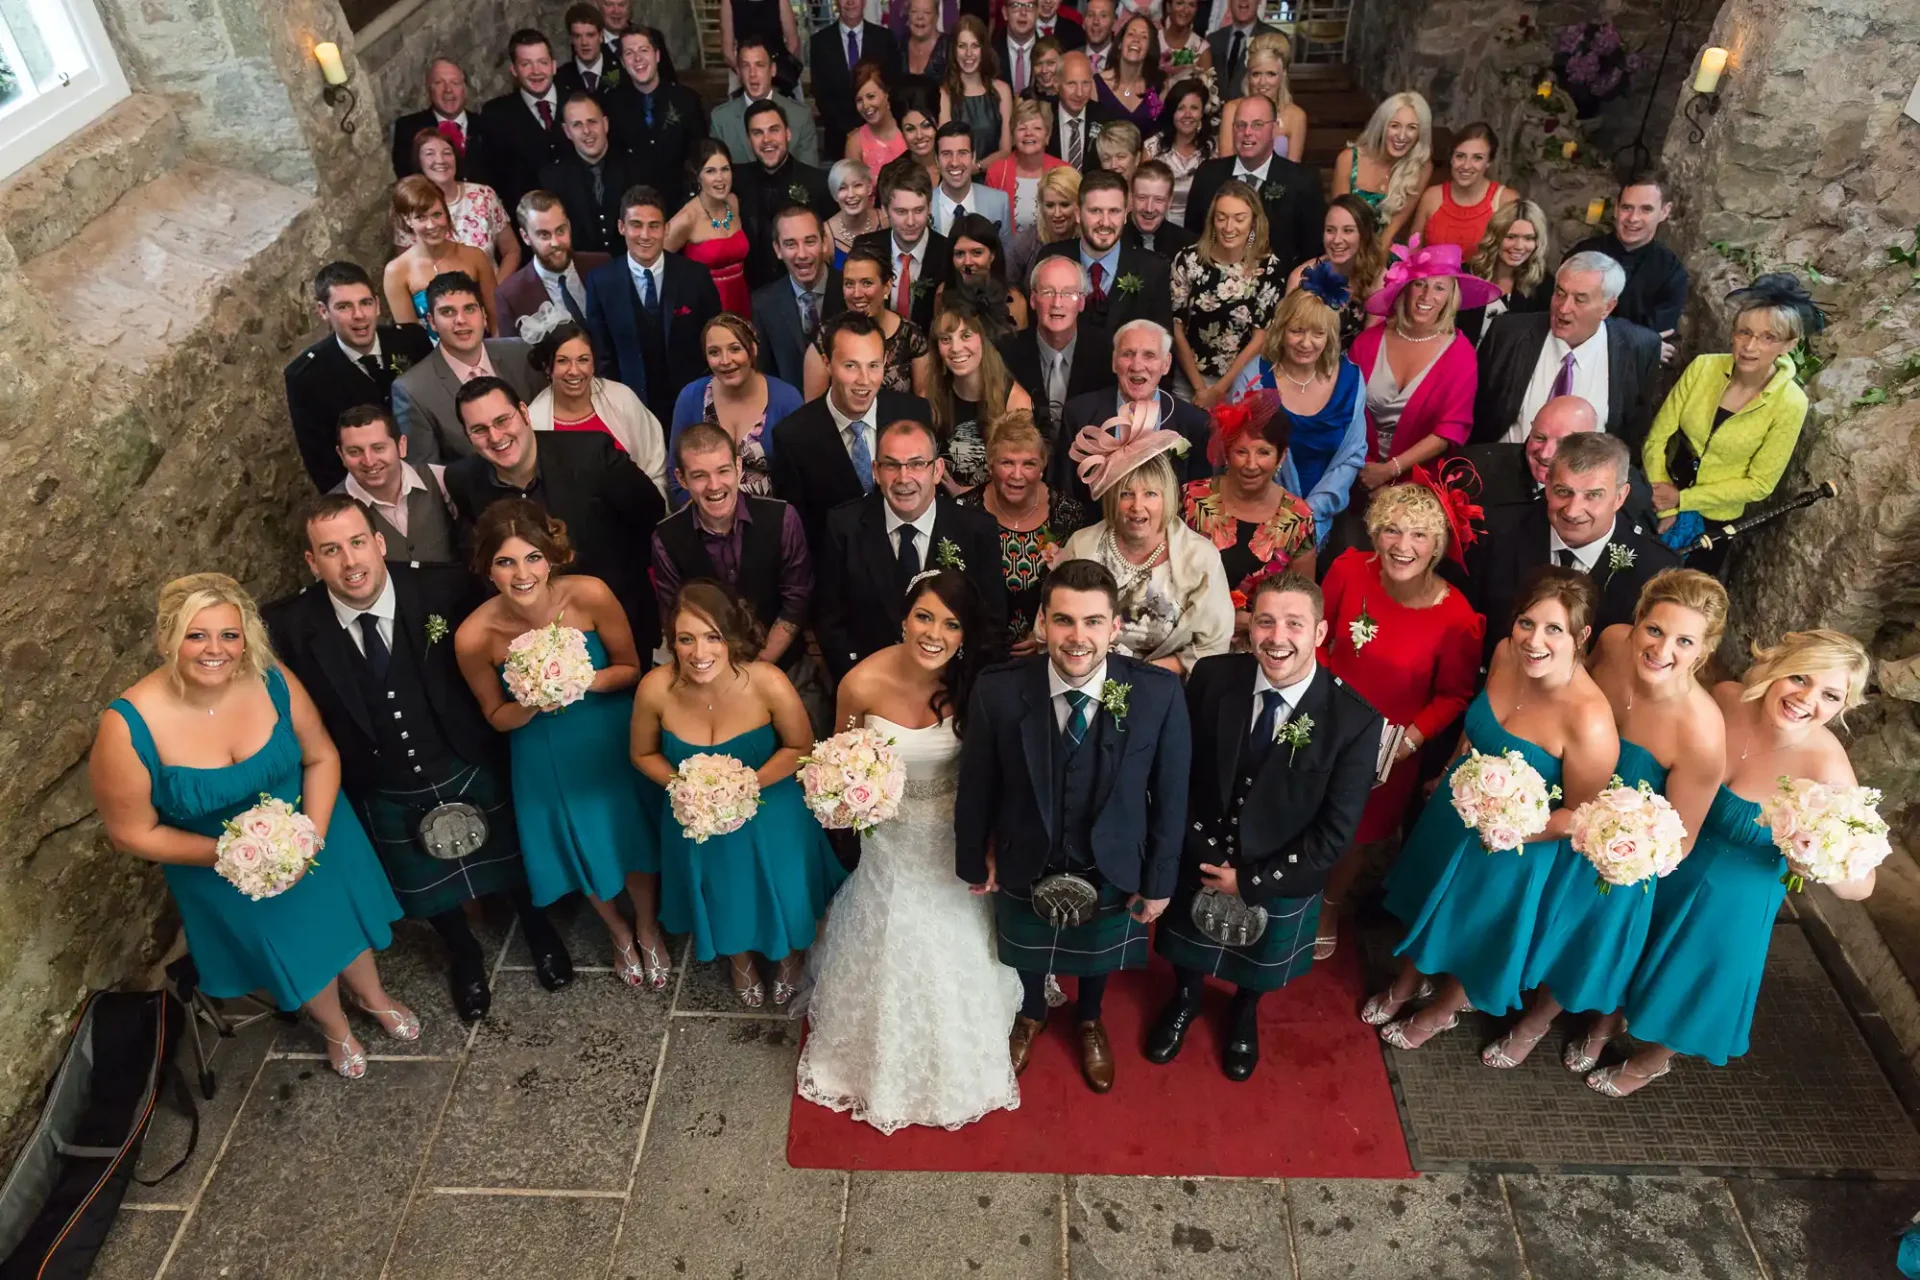 A large group of people posing for a wedding photo on a stone staircase, with several individuals in vibrant teal dresses and dark suits, centered by a bride and groom.